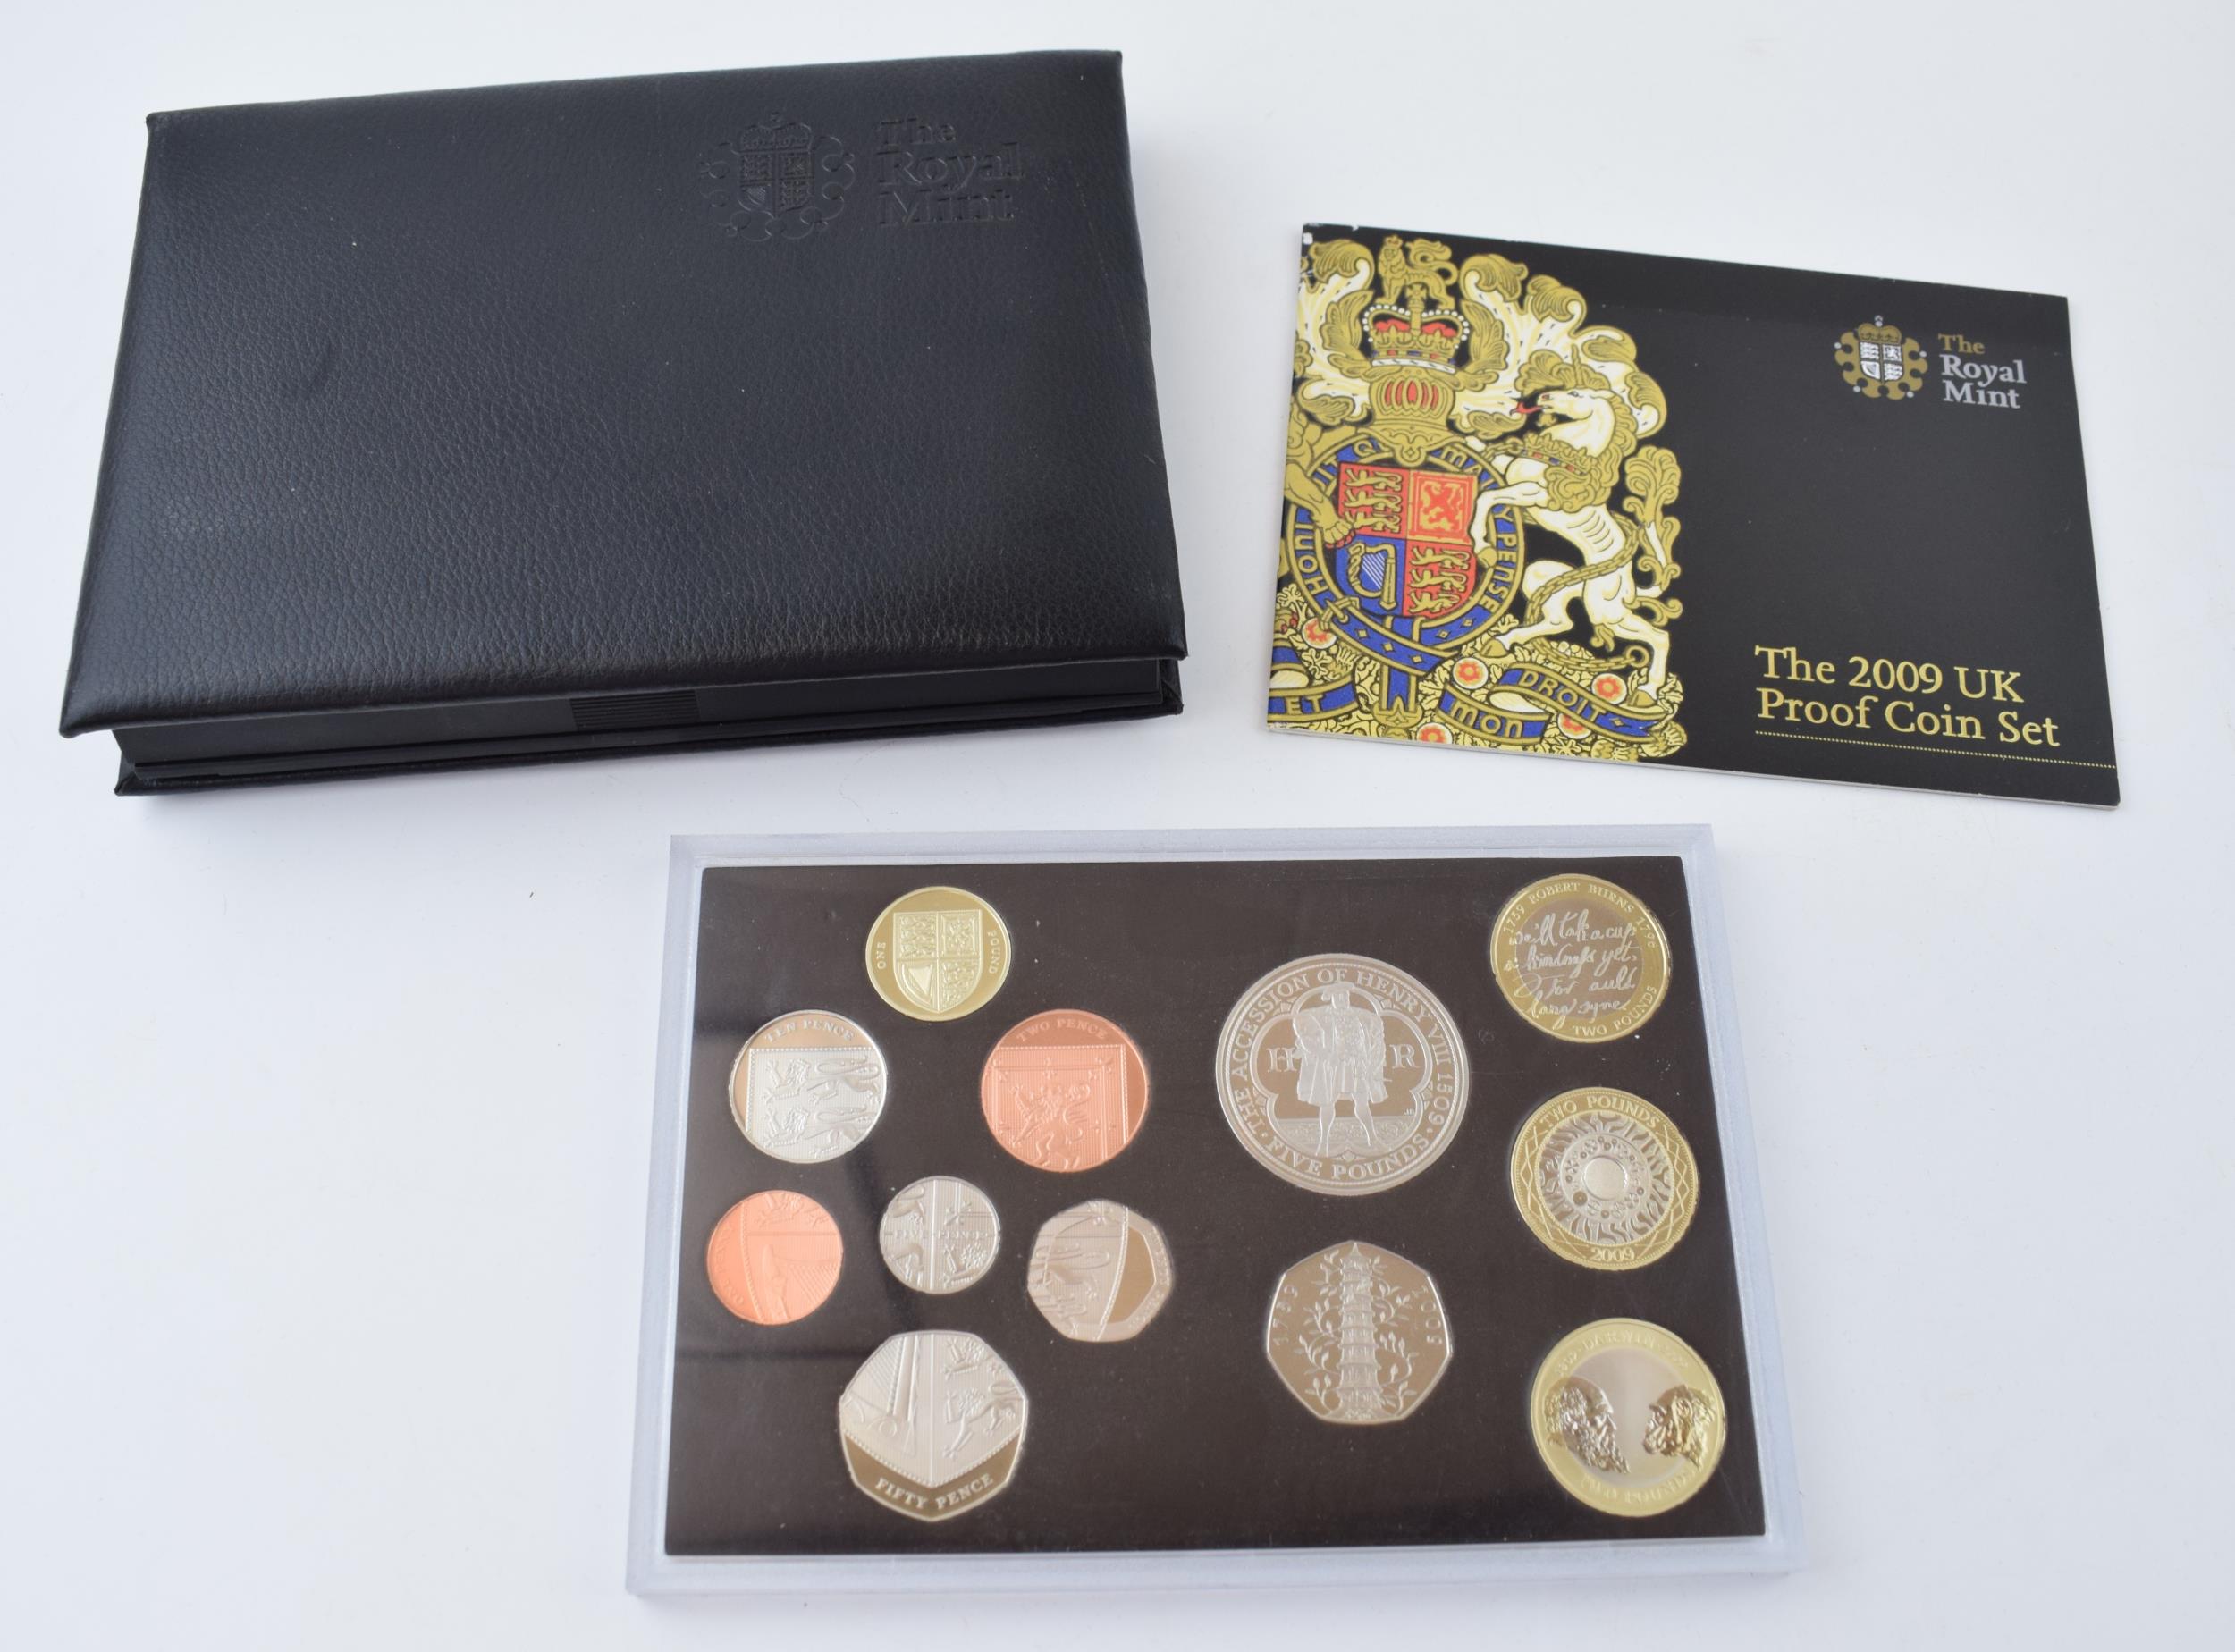 2009 UK Proof Coin set, 12 coins from £5-1p, including the 'Kew Gardens' 50p; in Royal Mint box with